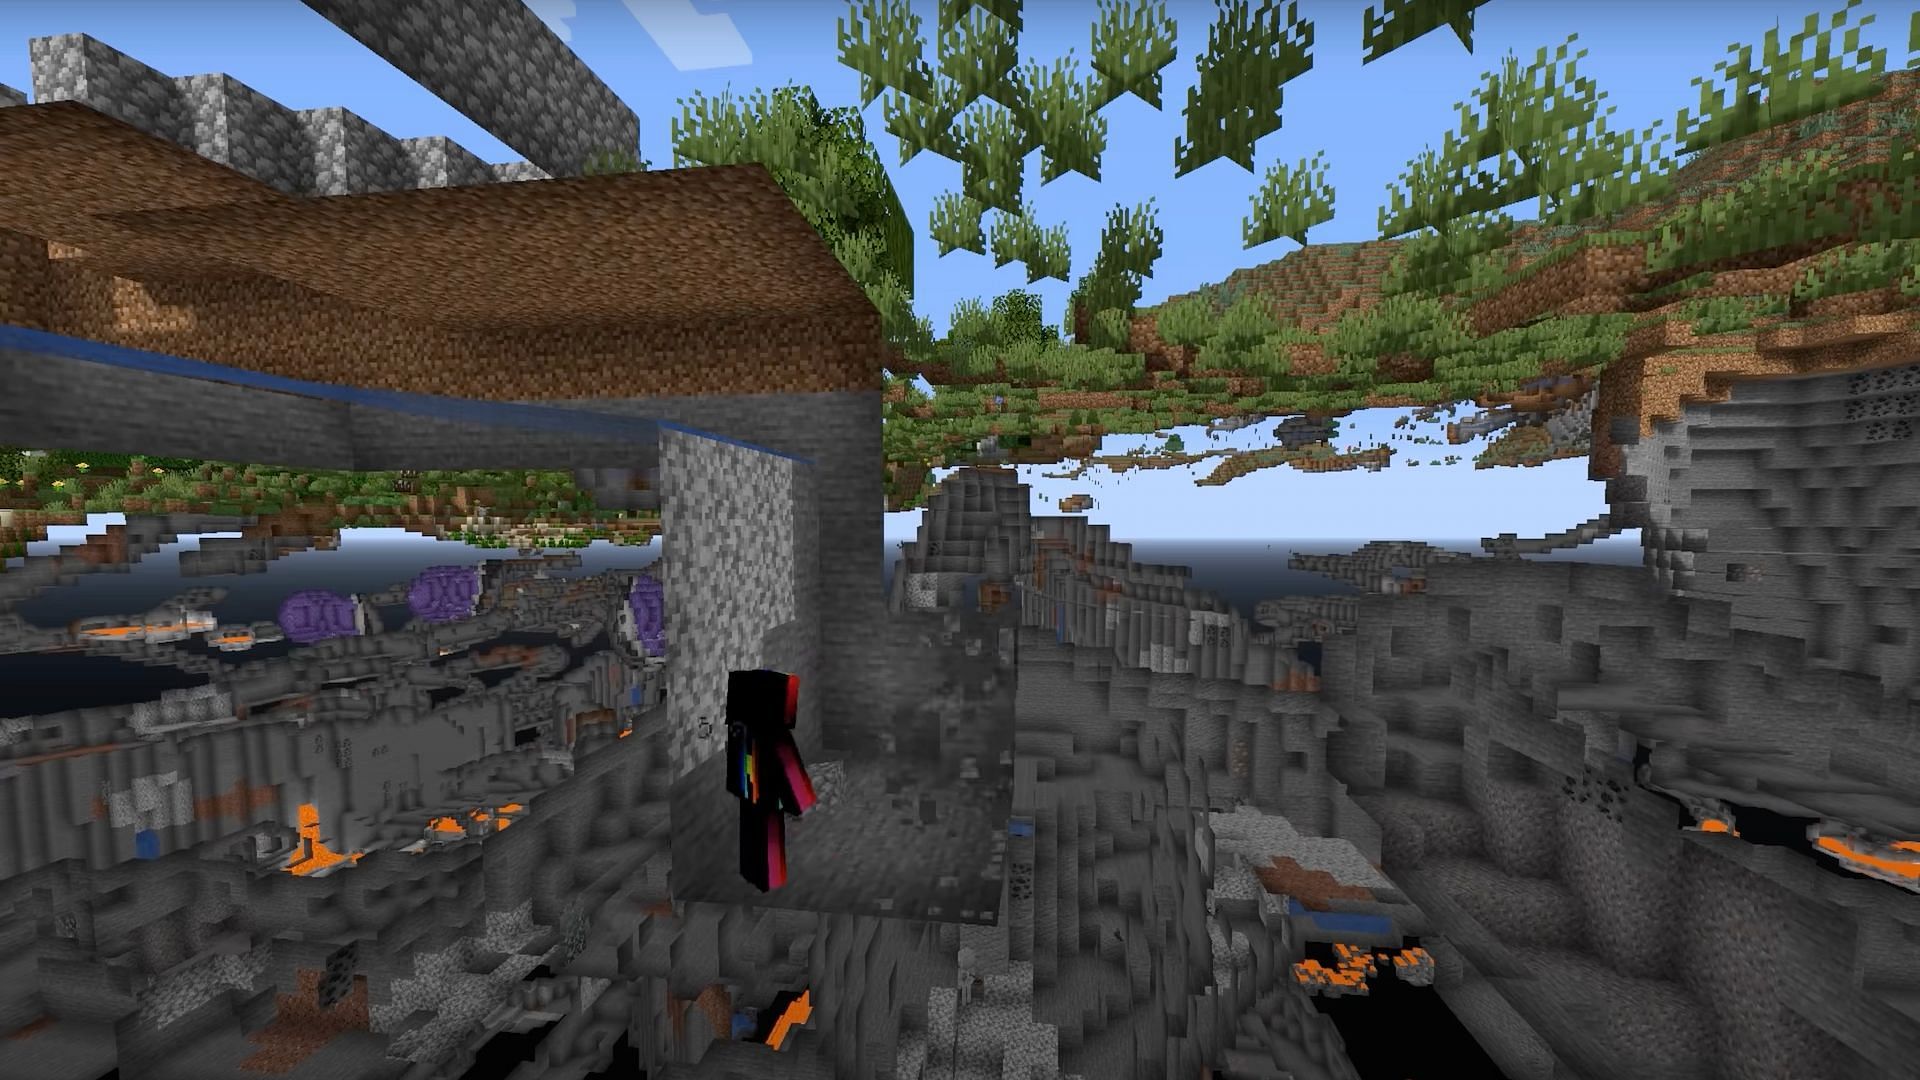 Users should dig down four blocks and then create a small room for collection (Image via Dusty Dude/YouTube)